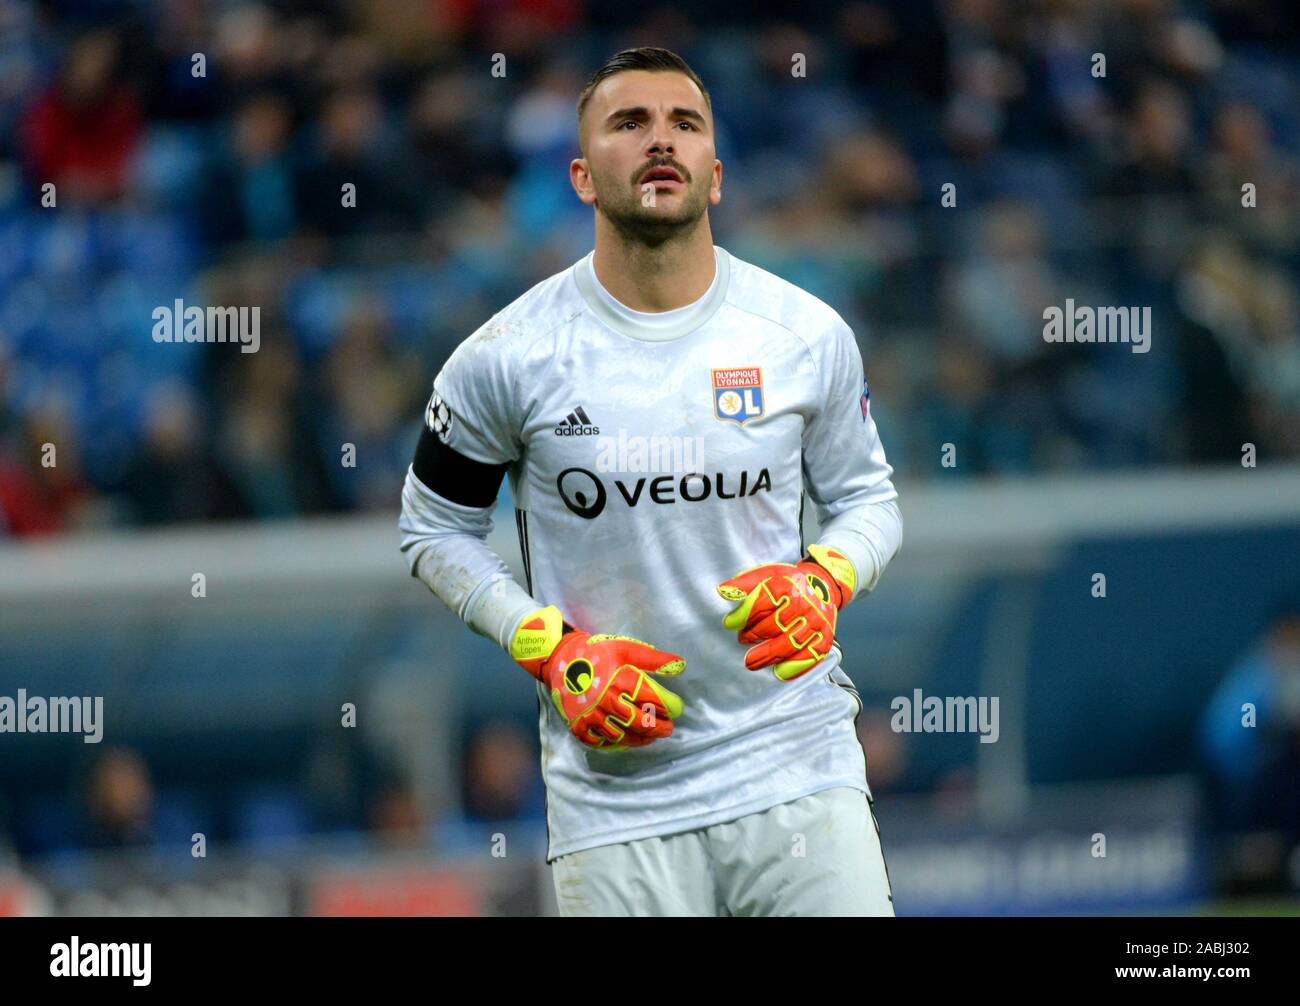 St. Petersburg, Russia. 27th Nov, 2019. Russia. St. Petersburg. November 27, 2019. Lyon player Anthony Lopes in the UEFA Champions League match between Zenit (St. Petersburg, Russia) and Lyon Credit: Andrey Pronin/ZUMA Wire/Alamy Live News Stock Photo